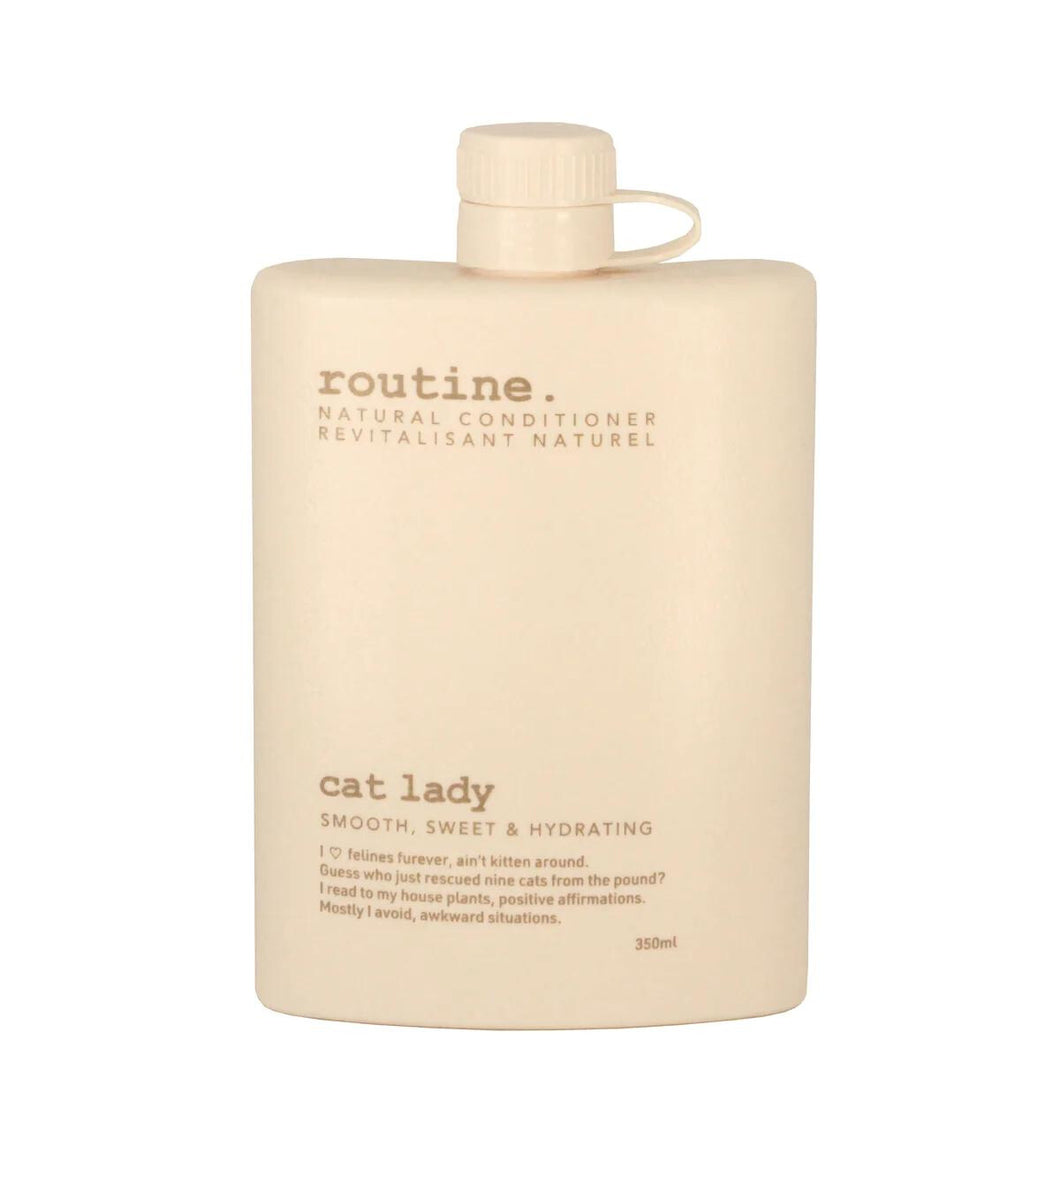 Routine Cat Lady Softening Conditioner 350ml